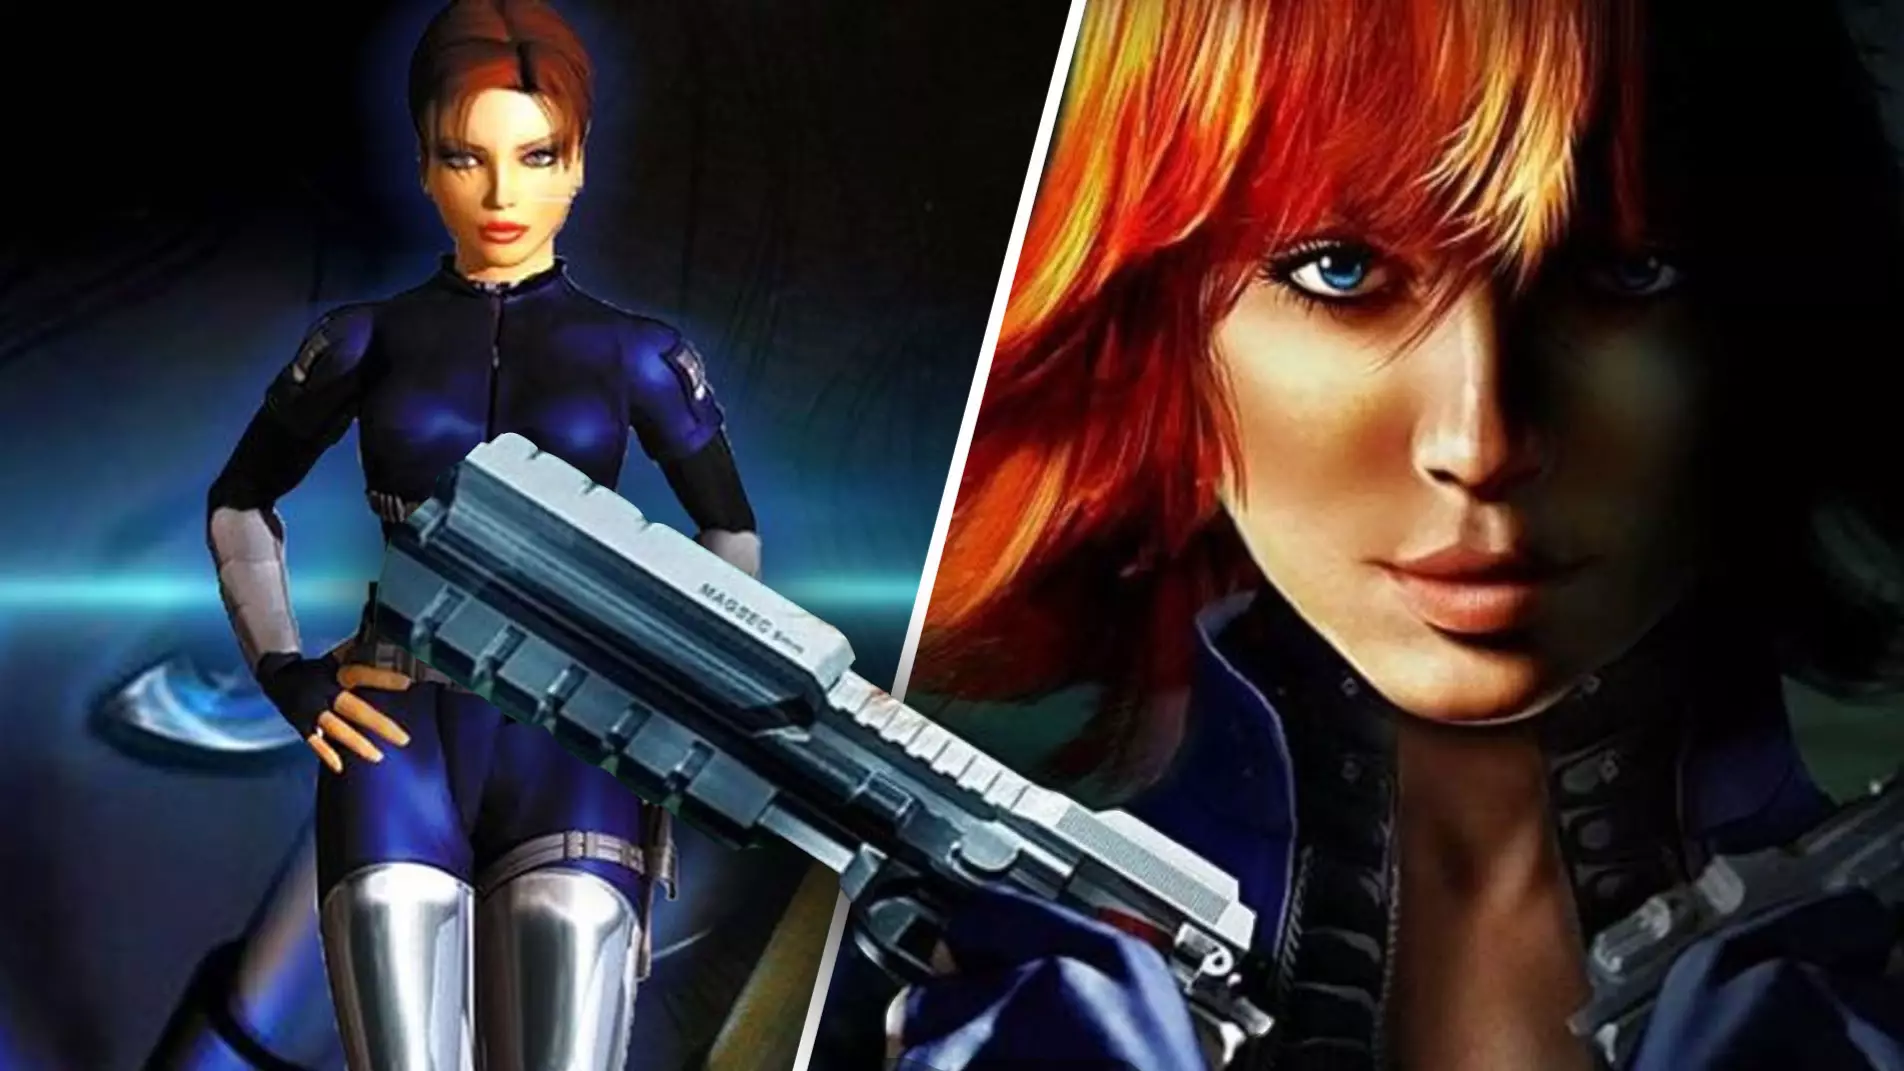 Perfect Dark Set For Third-Person Revival On Xbox, According To Report